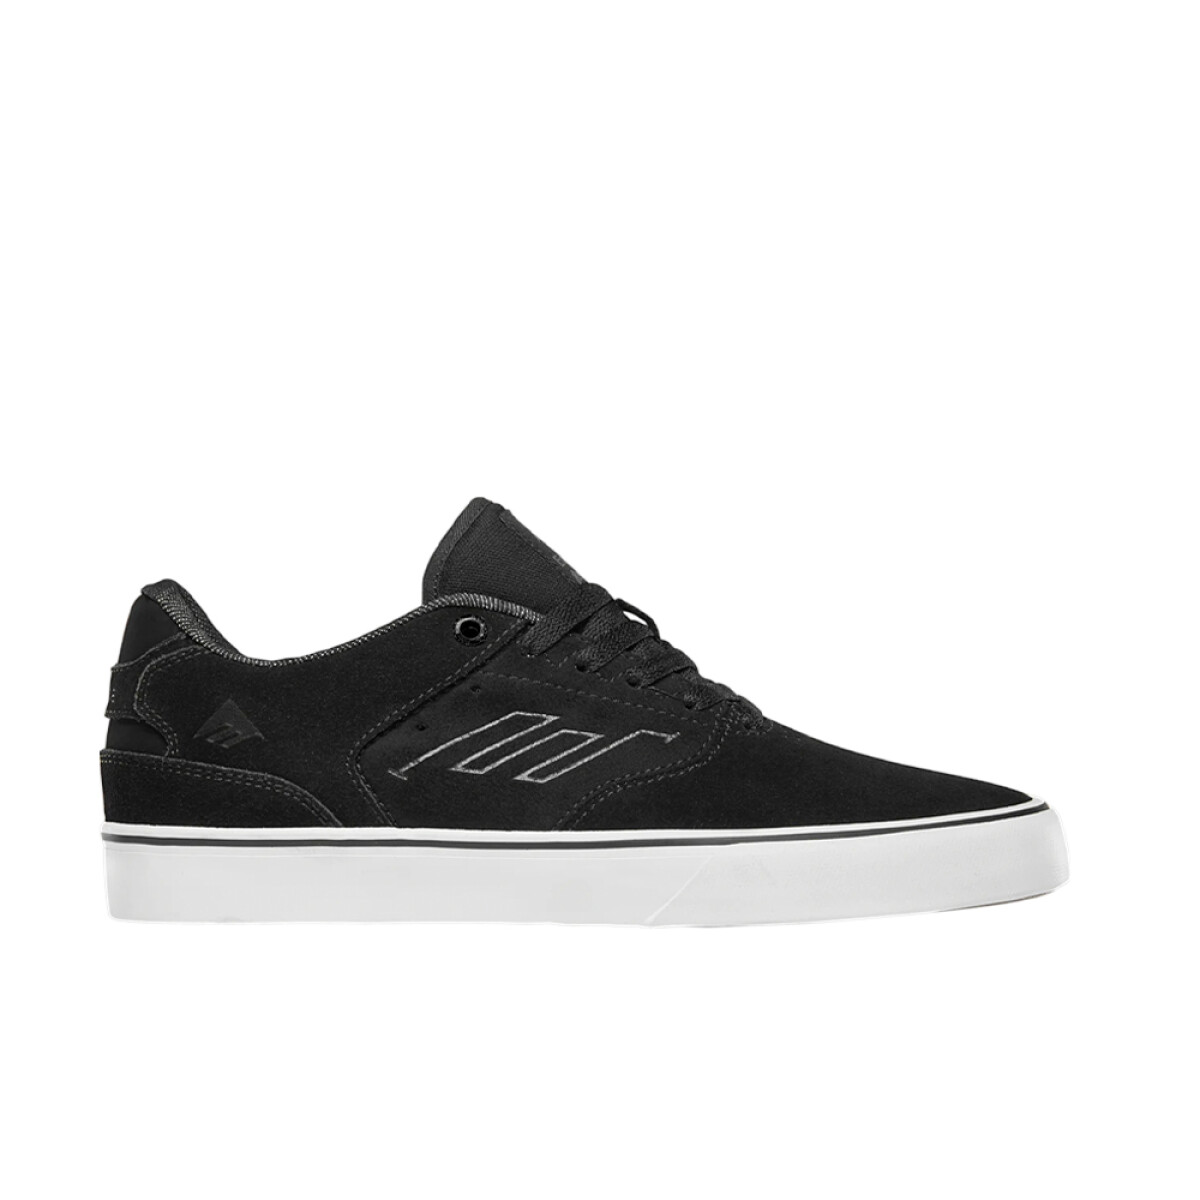 EMERICA THE LOW VULC YOUTH - 979 